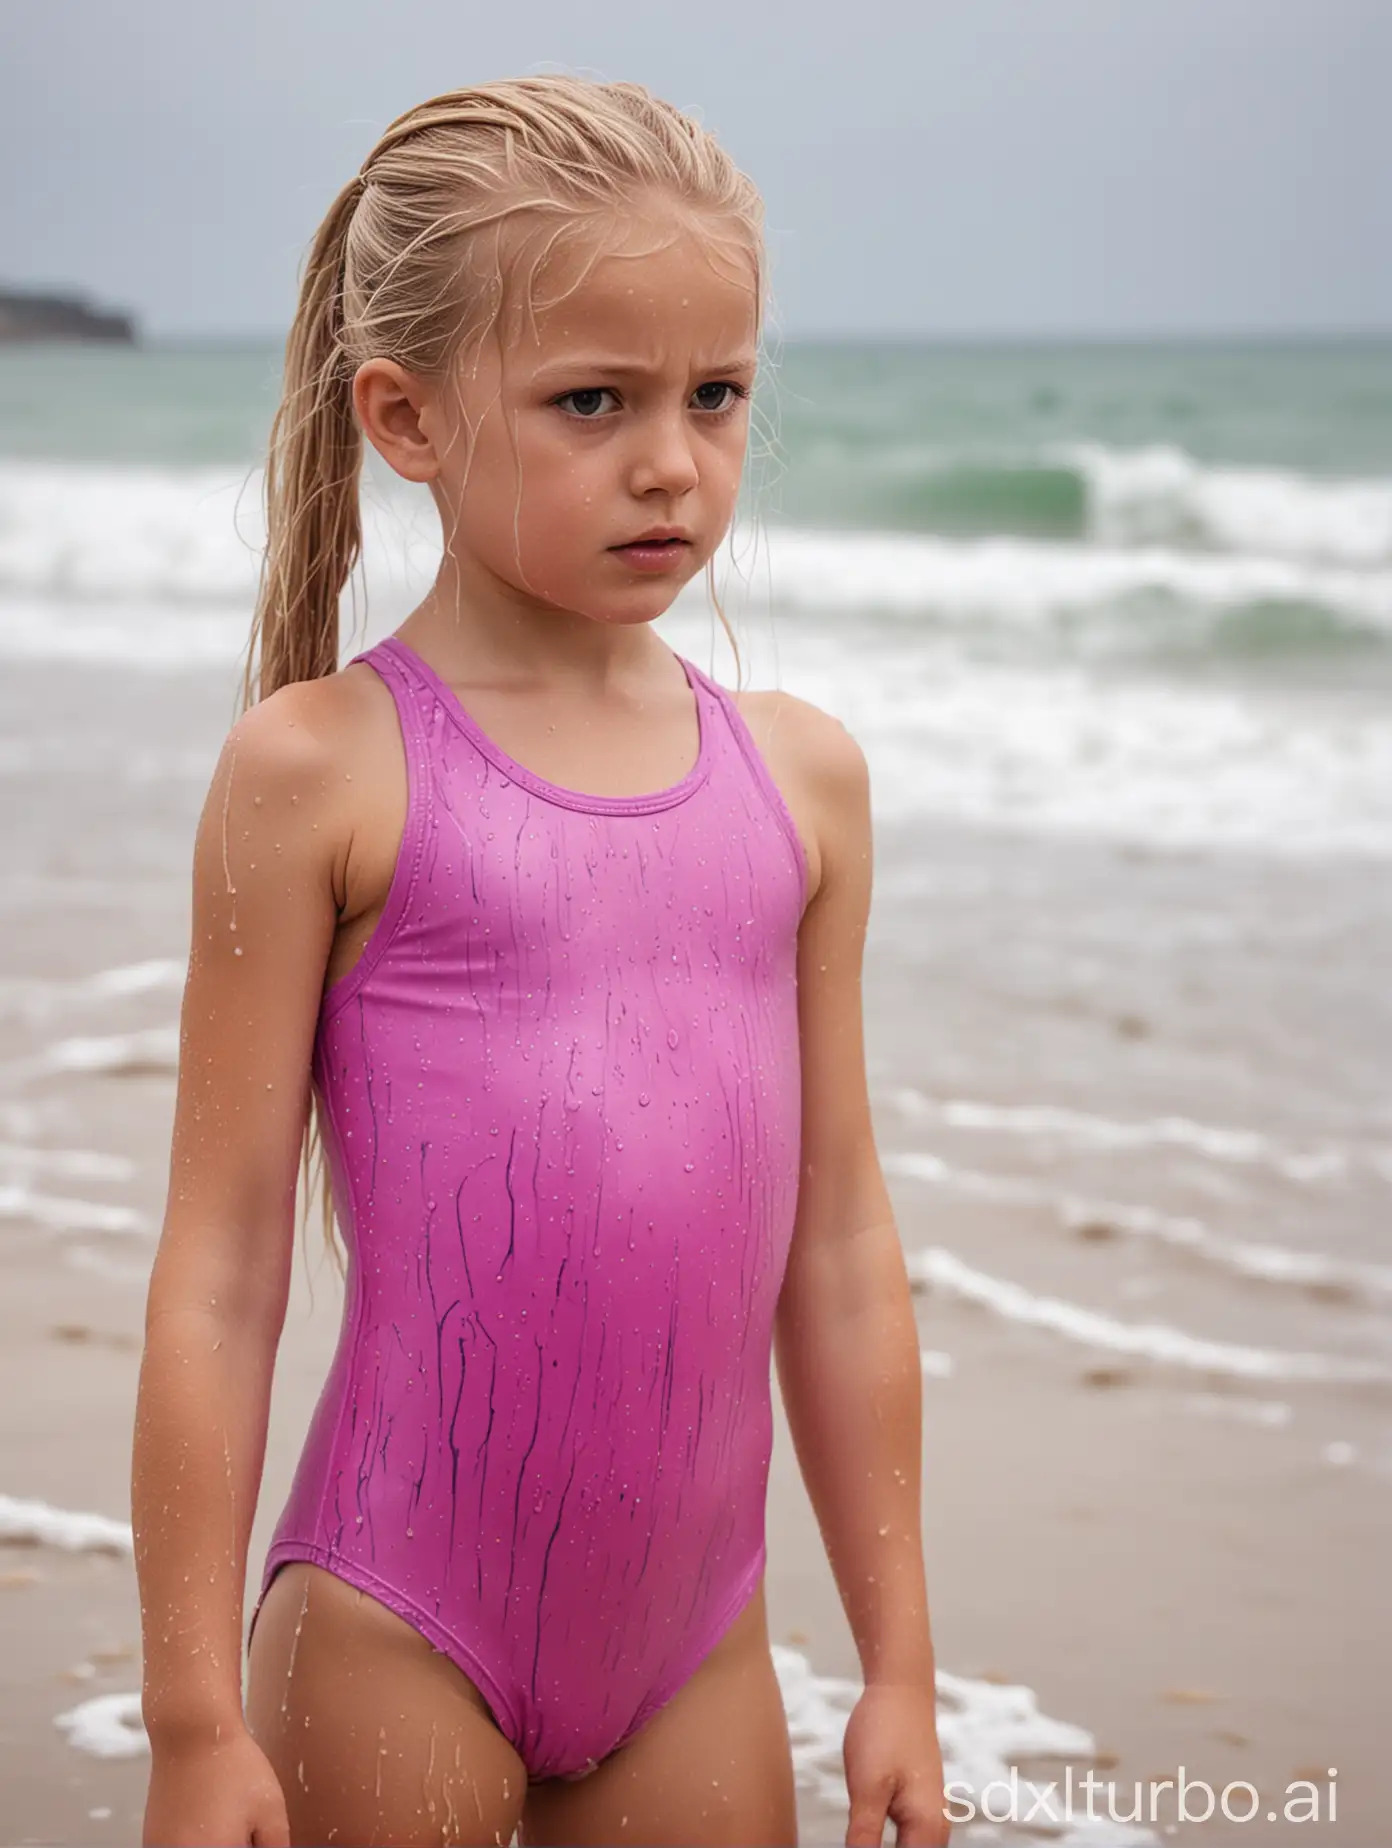 A blond and wet 8 year old girl with a long ponytail is wearing a tight pink and purple tight one piece swimsuit at the beach not looking amused.